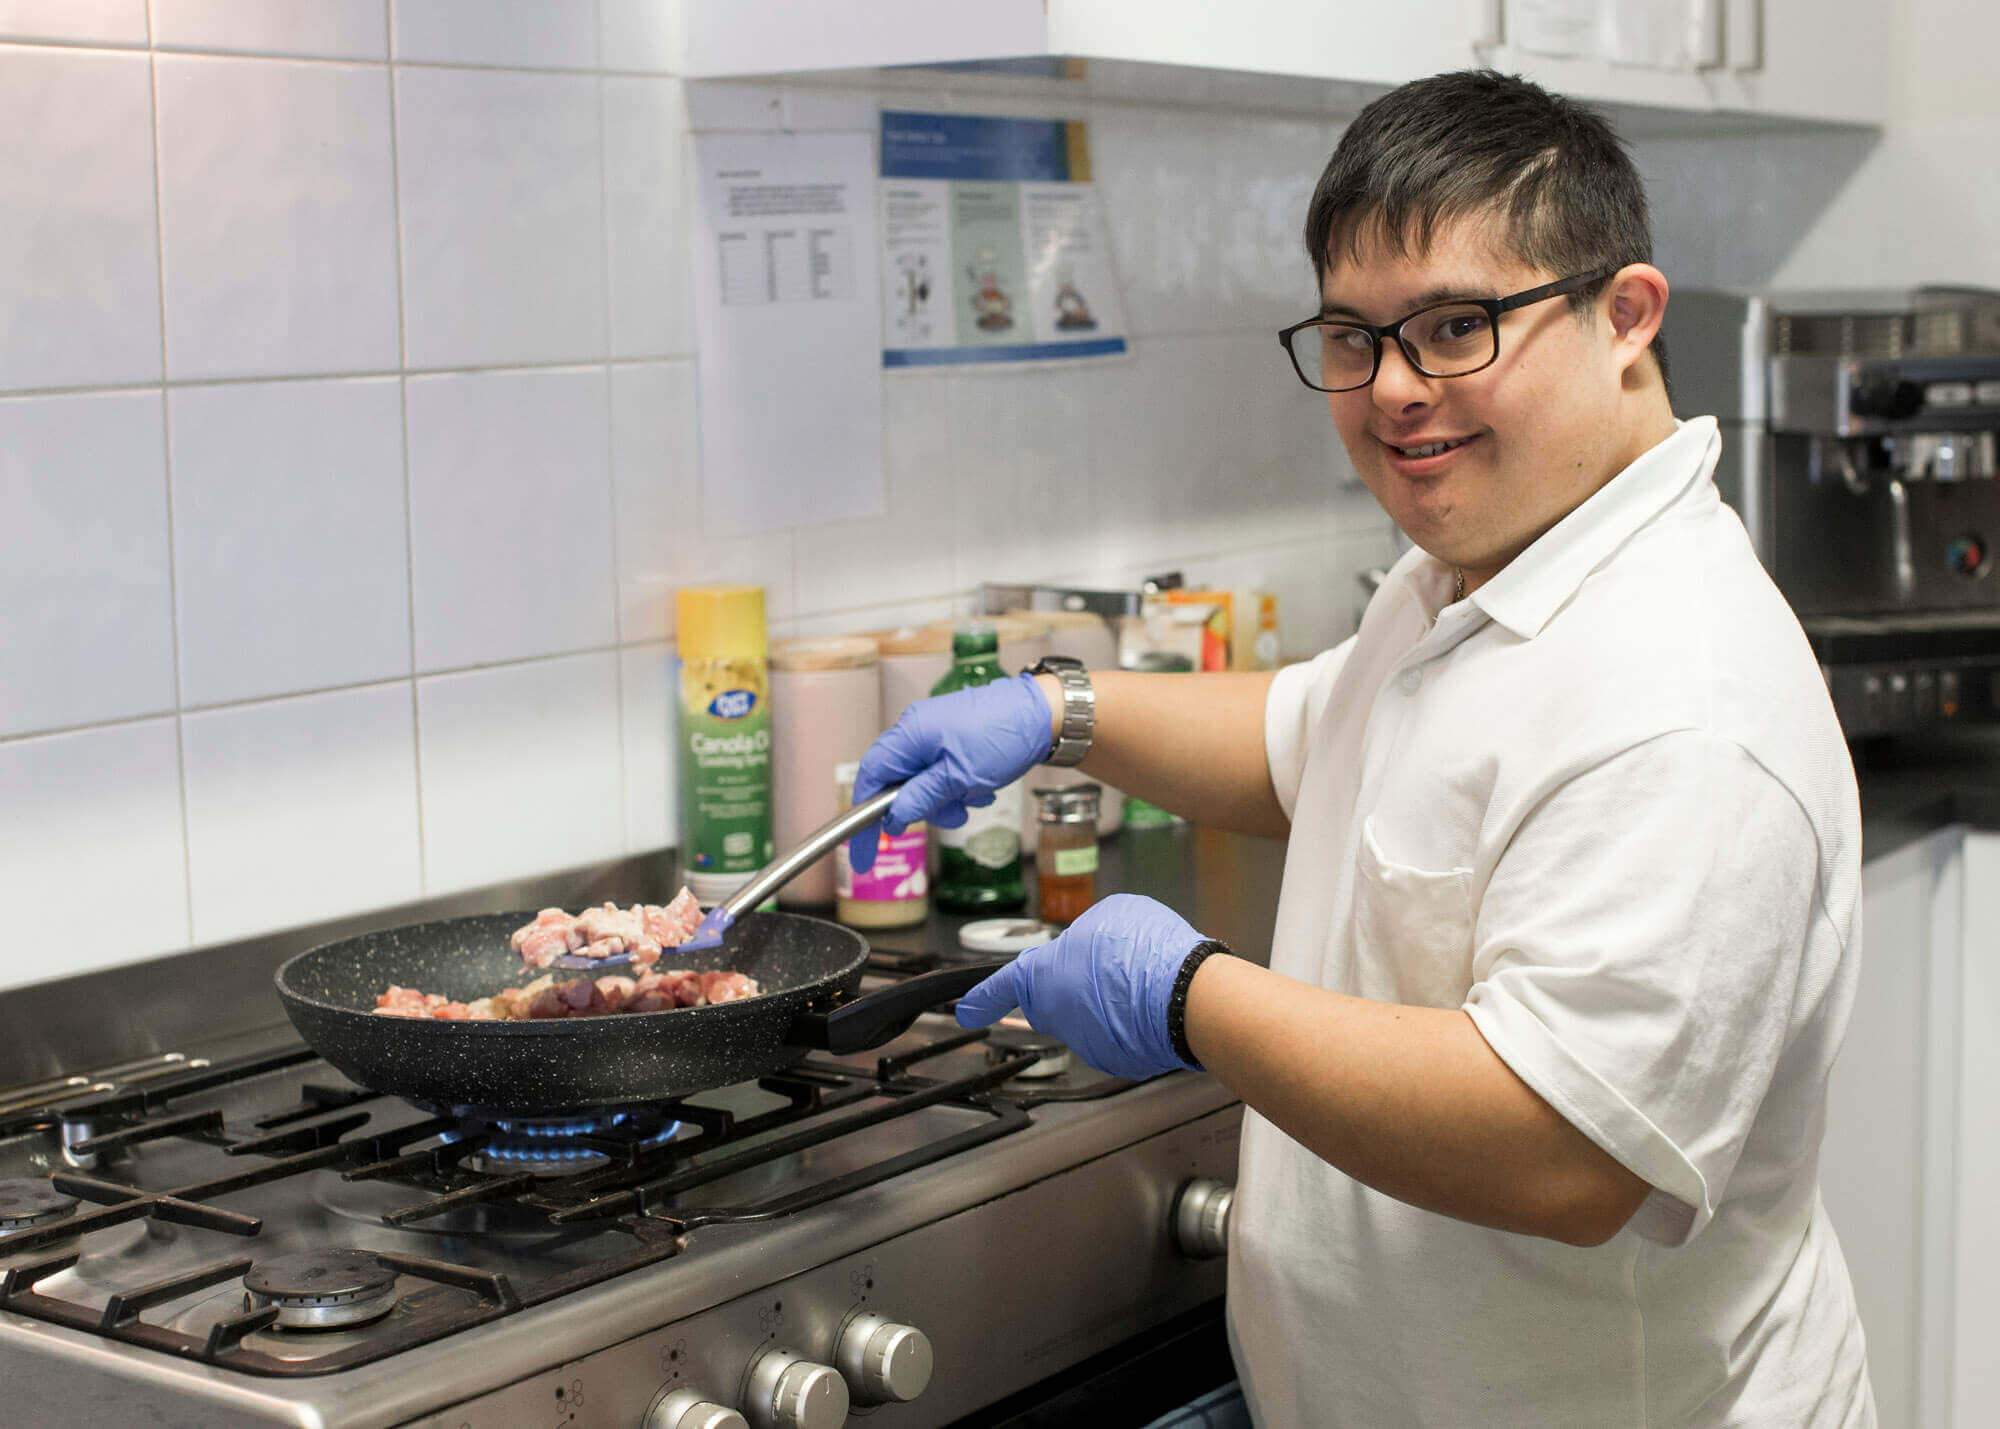 activ client cooking in the kitchen - supported independent living